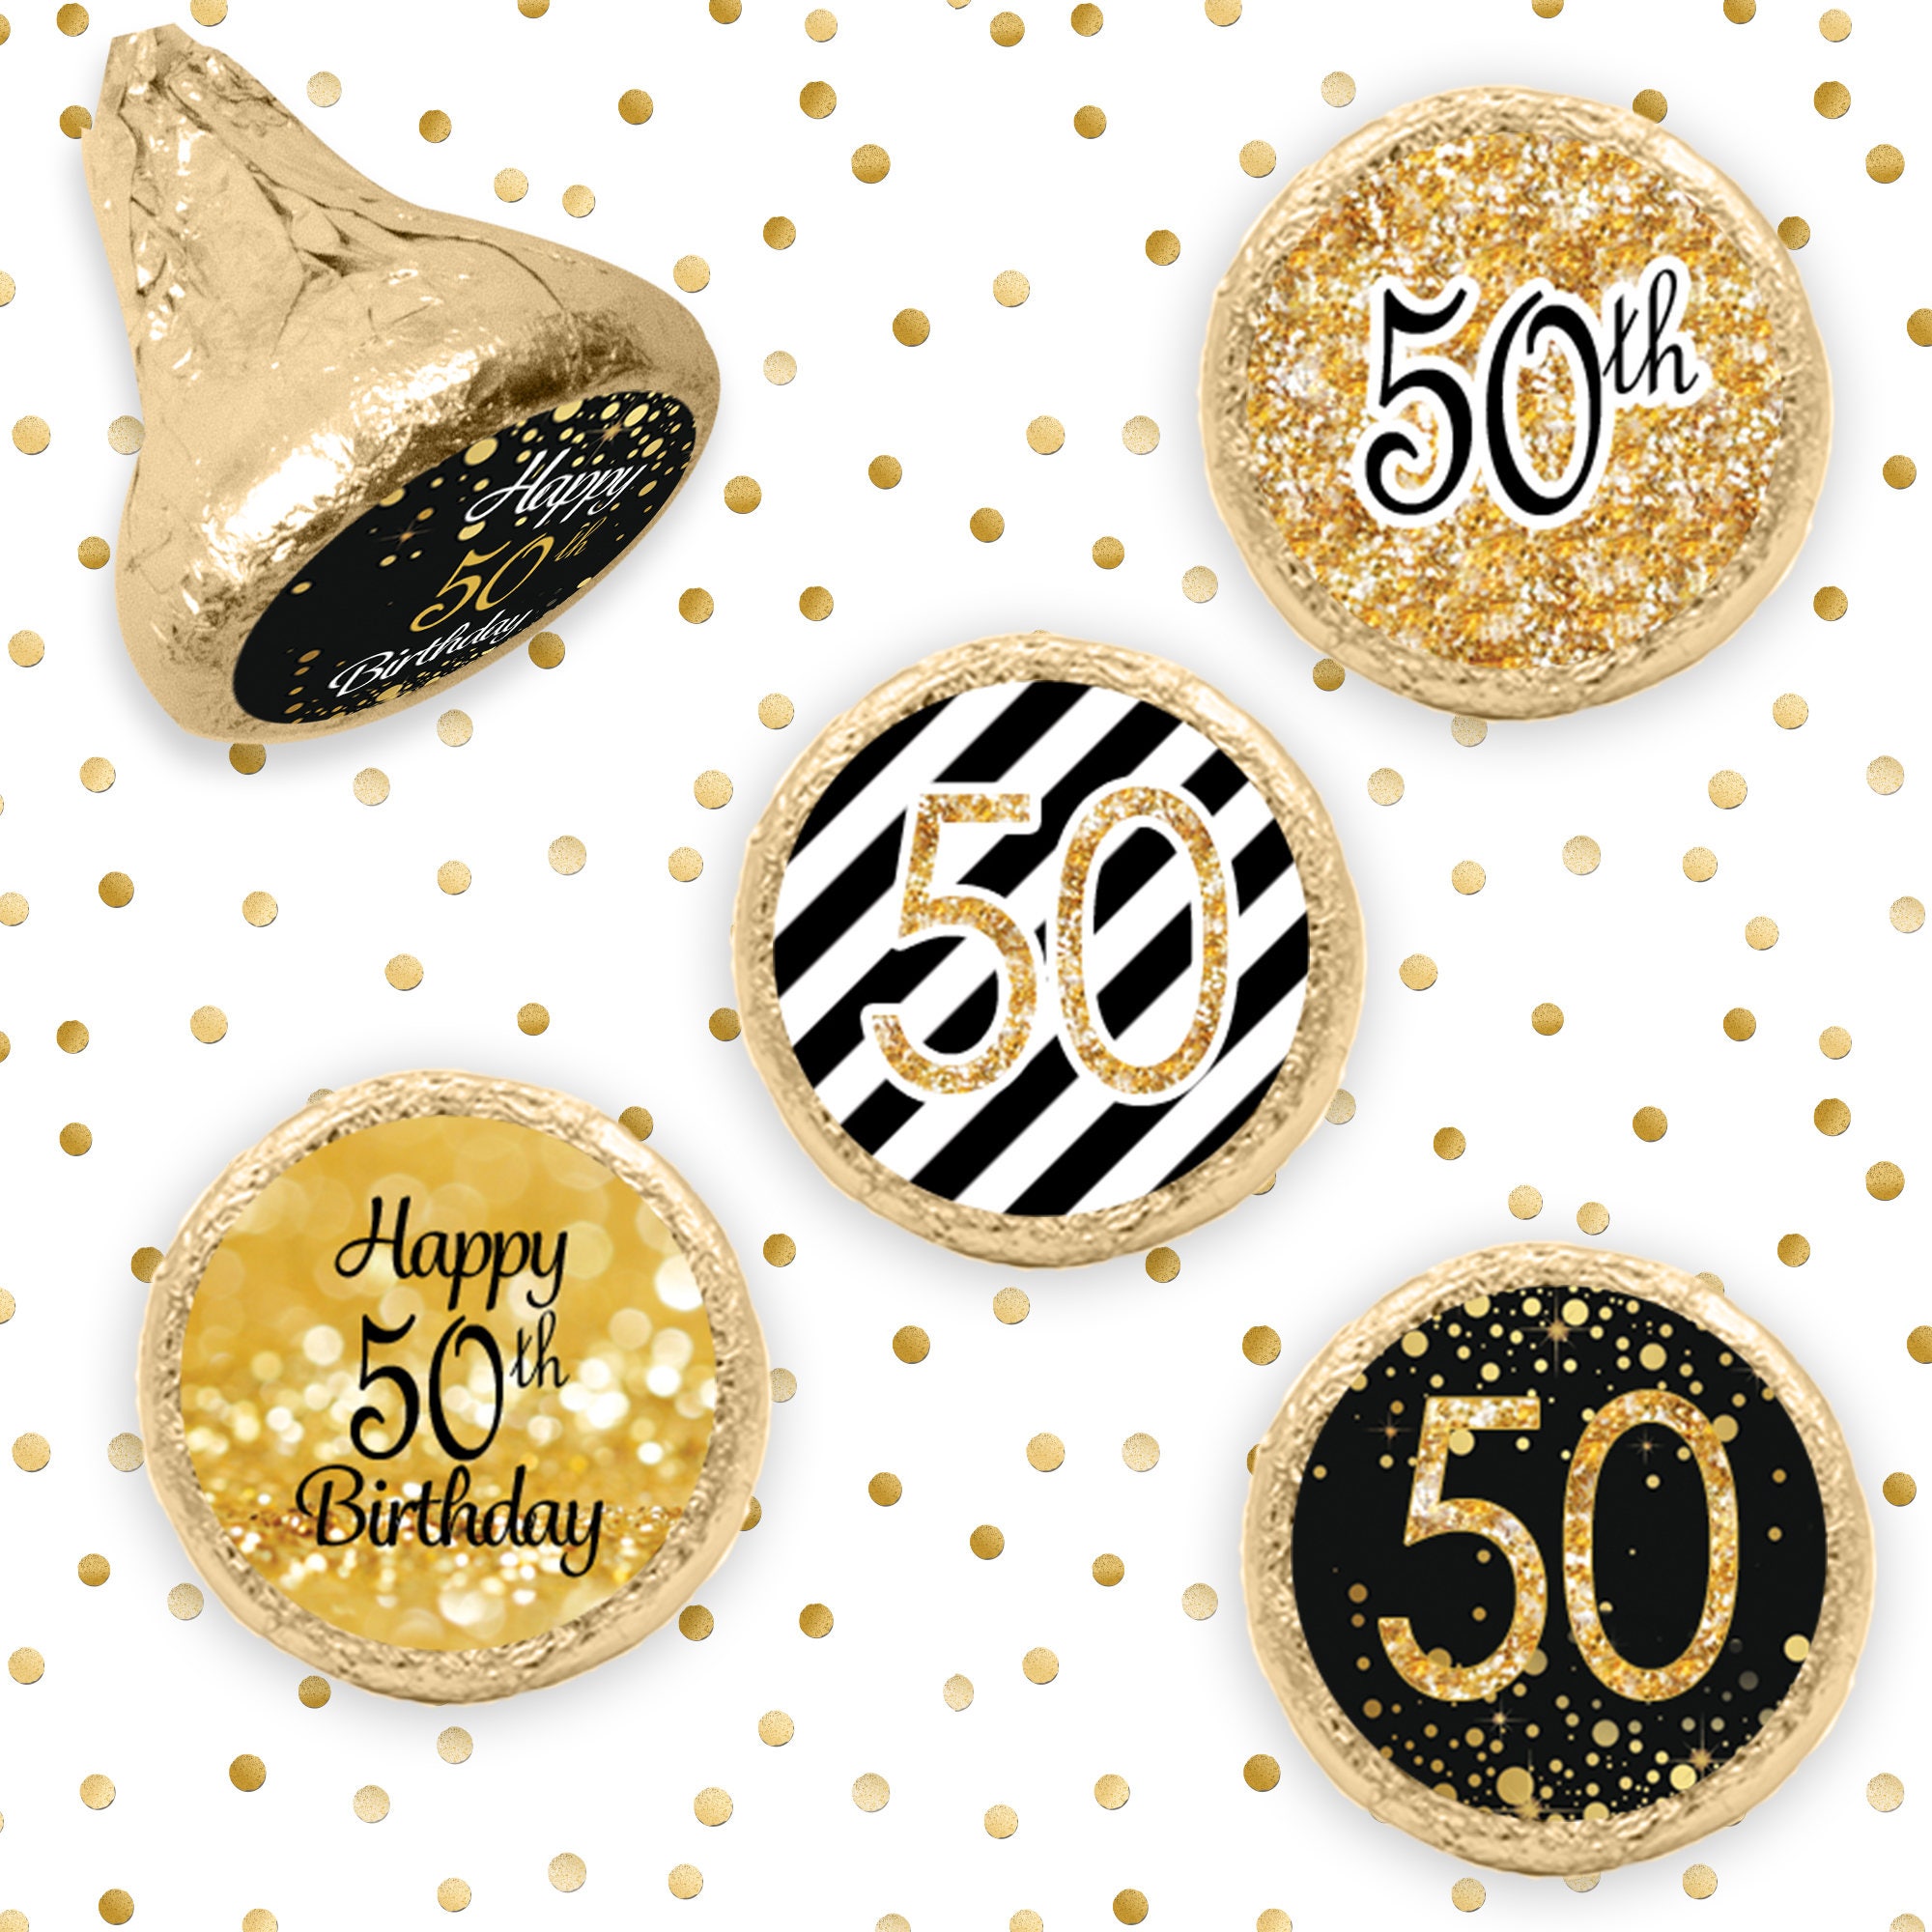  50th Happy Birthday Party Favors Black and Gold 50th 